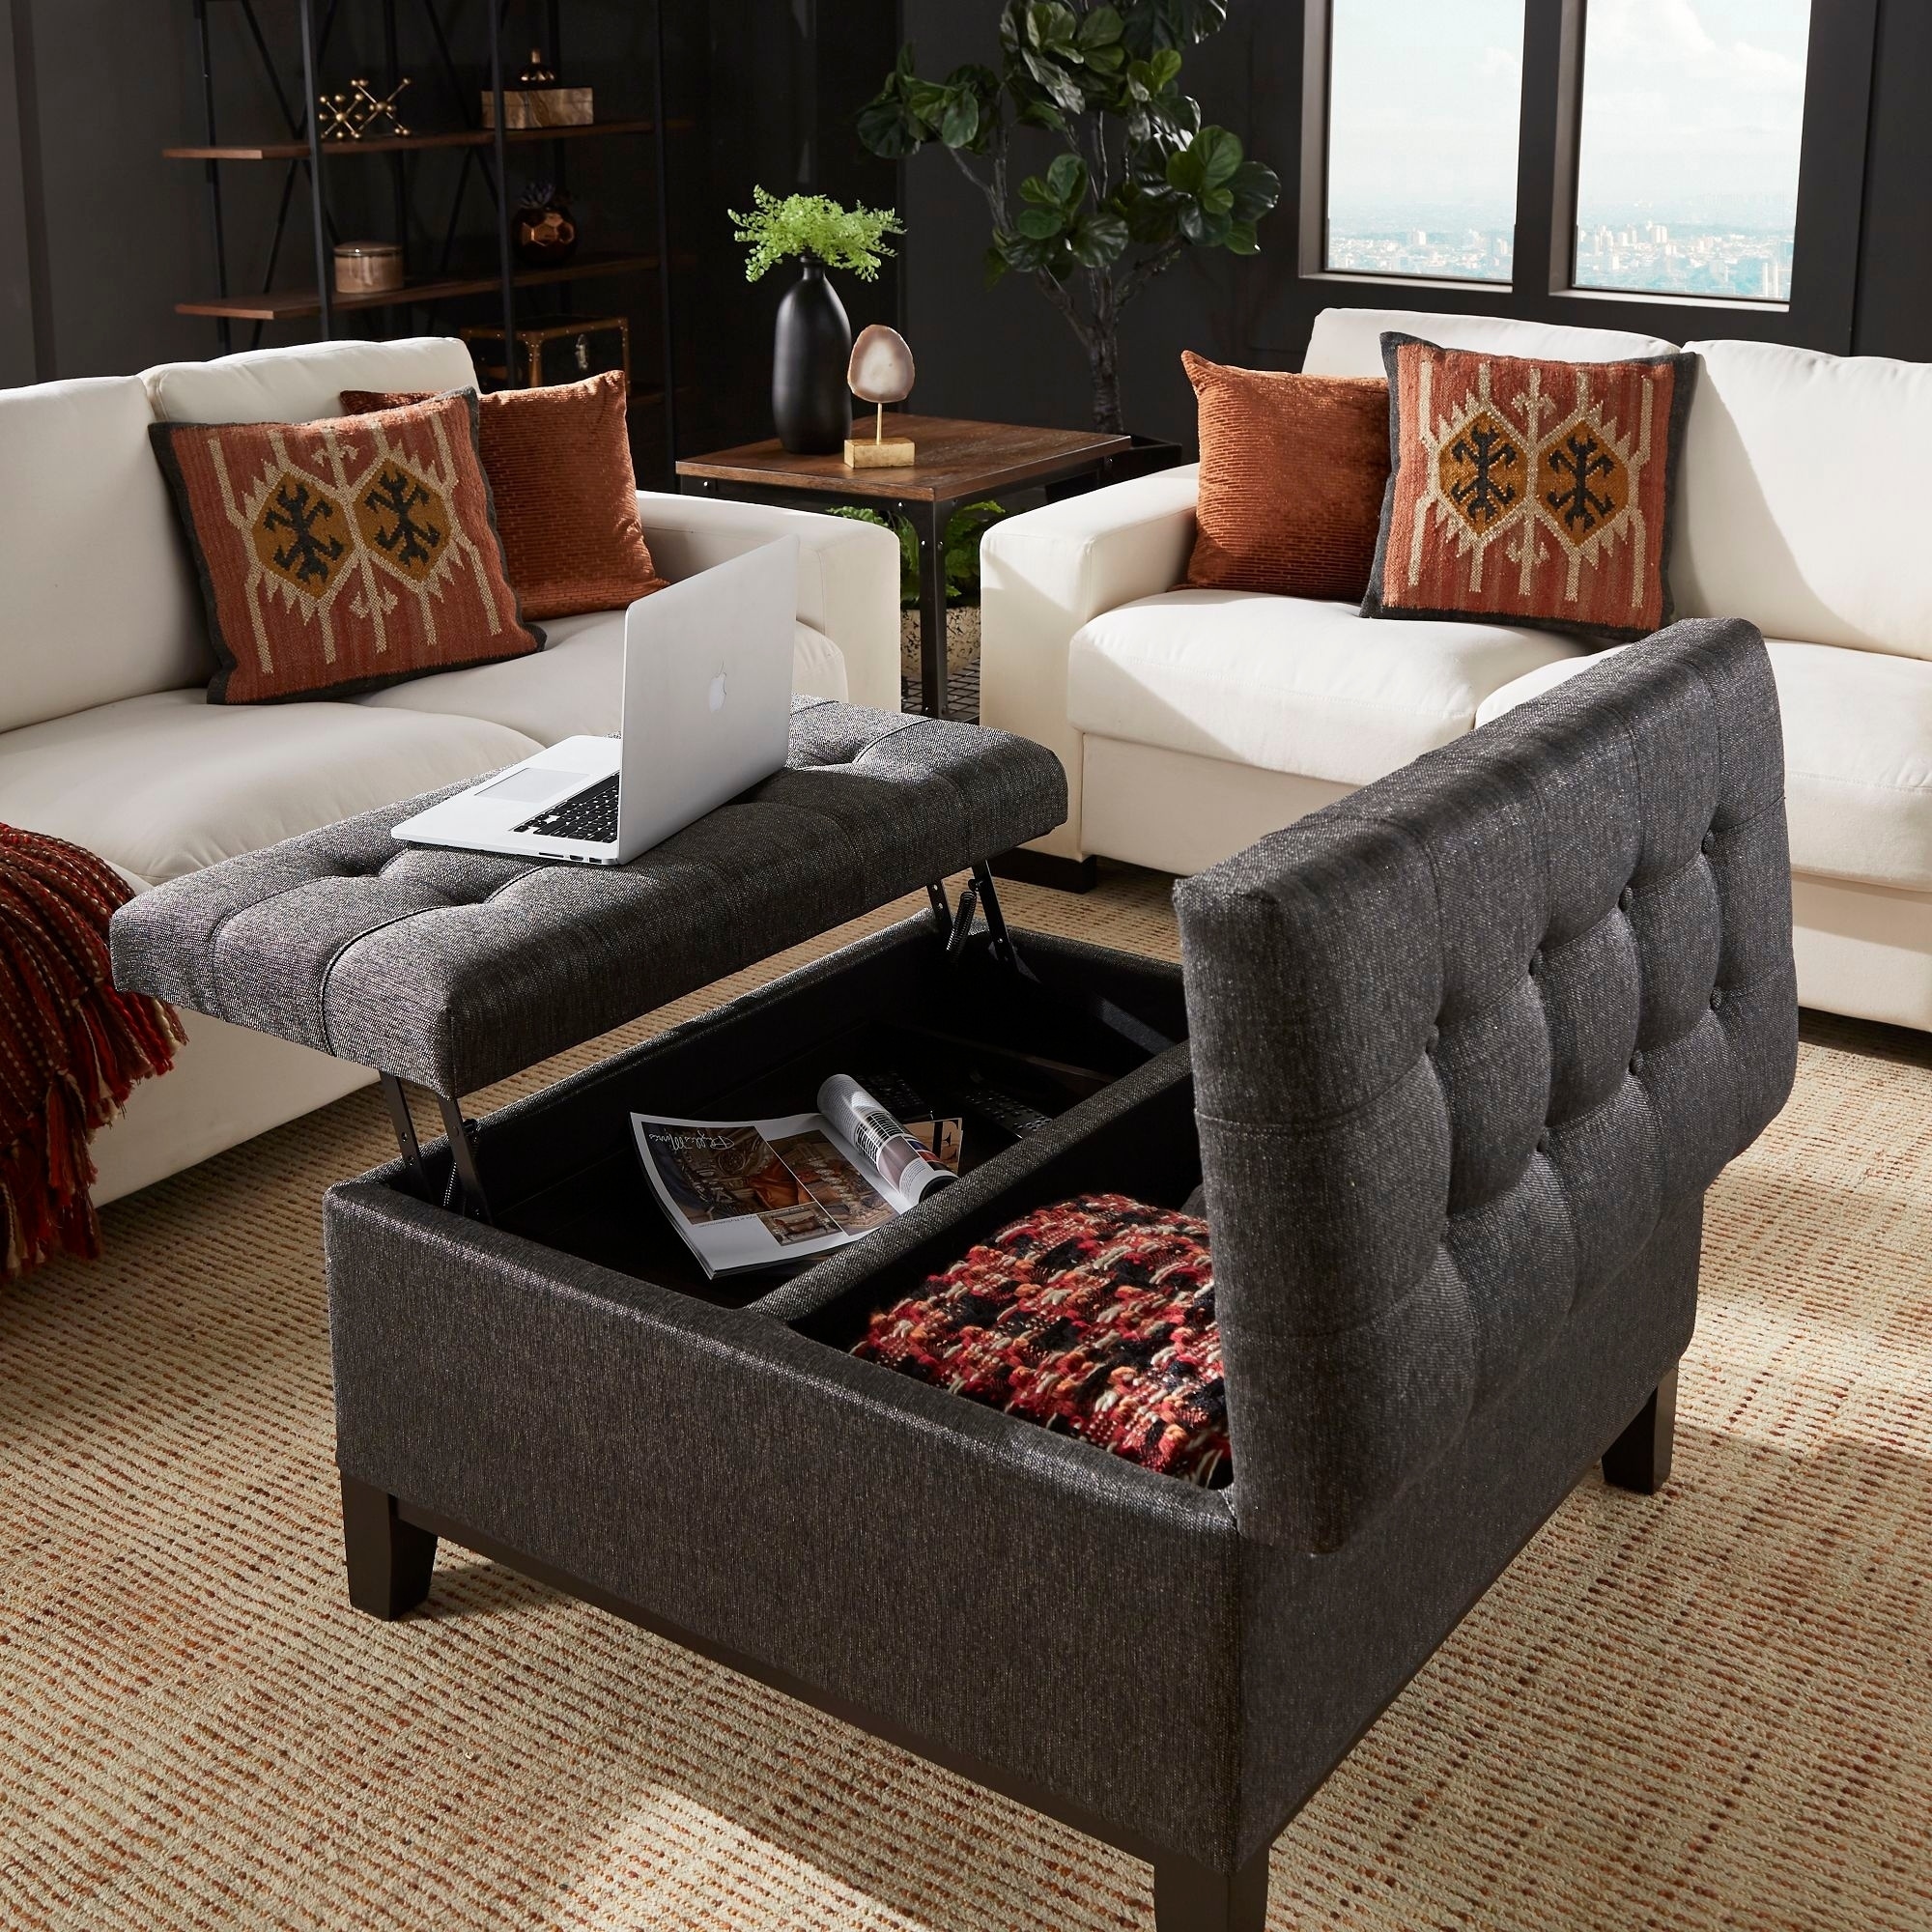 Denton Lift Top Storage Ottoman With 2 Trays By Inspire Q Classic On Sale Overstock 30481728